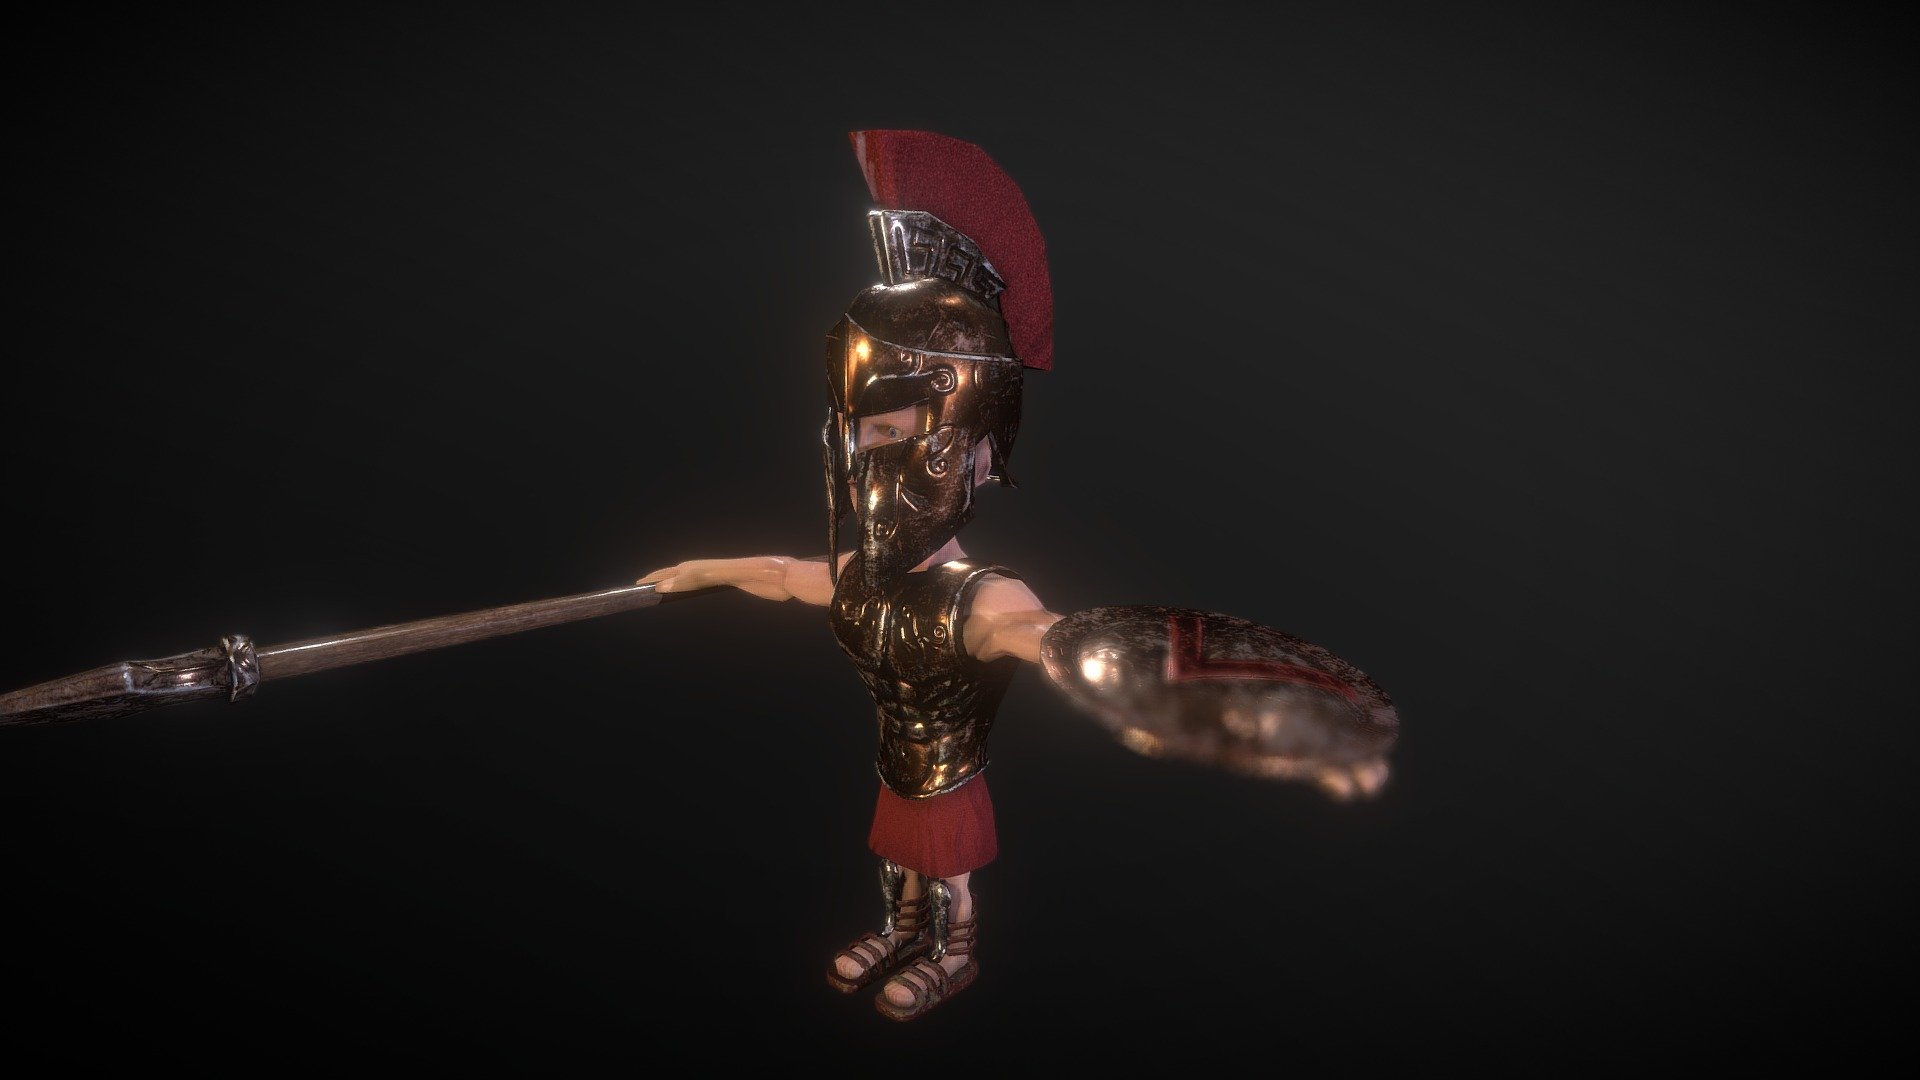 Low Poly Test For Gaming Cartoon Spartan Hoplite Modelling Done in (Blender 3D) so It doesn't need retopology Sculpted in (ZBrush 4R7) Texured in (Substance Painter) Sill Needs Rig And Pose :D - Cartoon Spartan Hoplite - 3D model by Mohab Fawzy (@MohabFawzy3D) 3d model